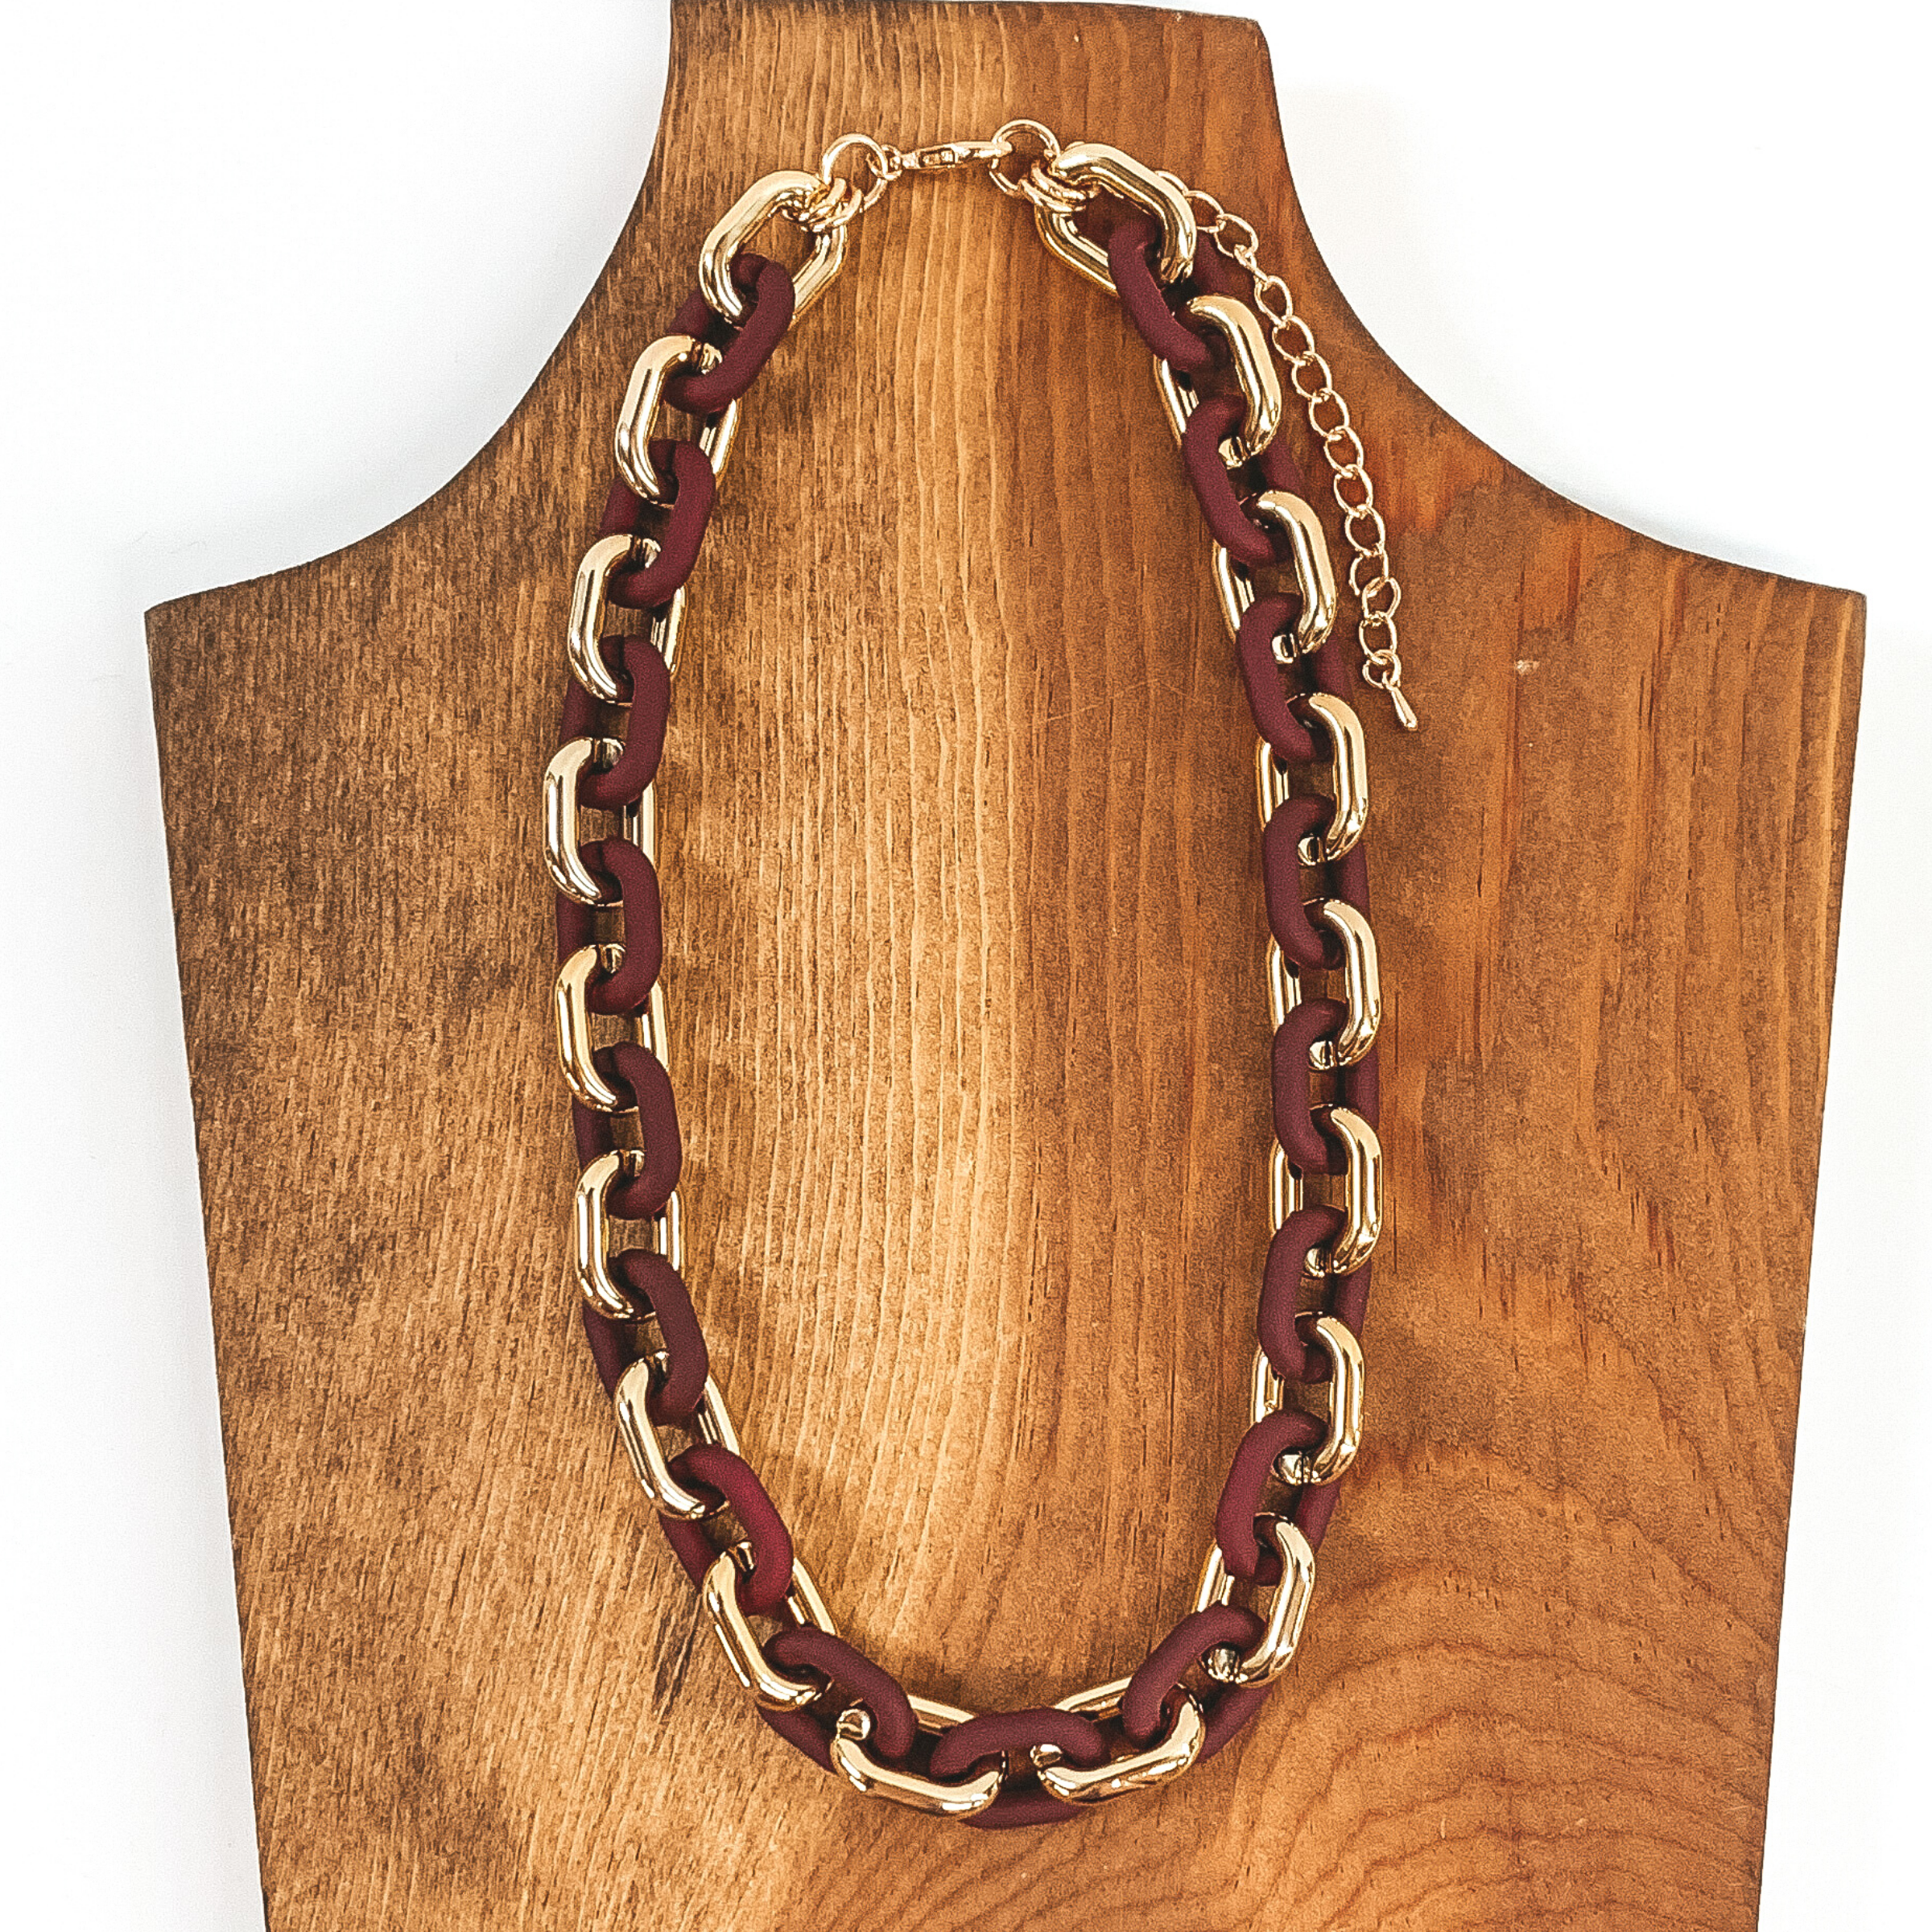 This necklace has thick gold and matte maroon links that repeat. It has a gold adjustable chain. This necklace is pictured of a piece of wood that is on a white background.